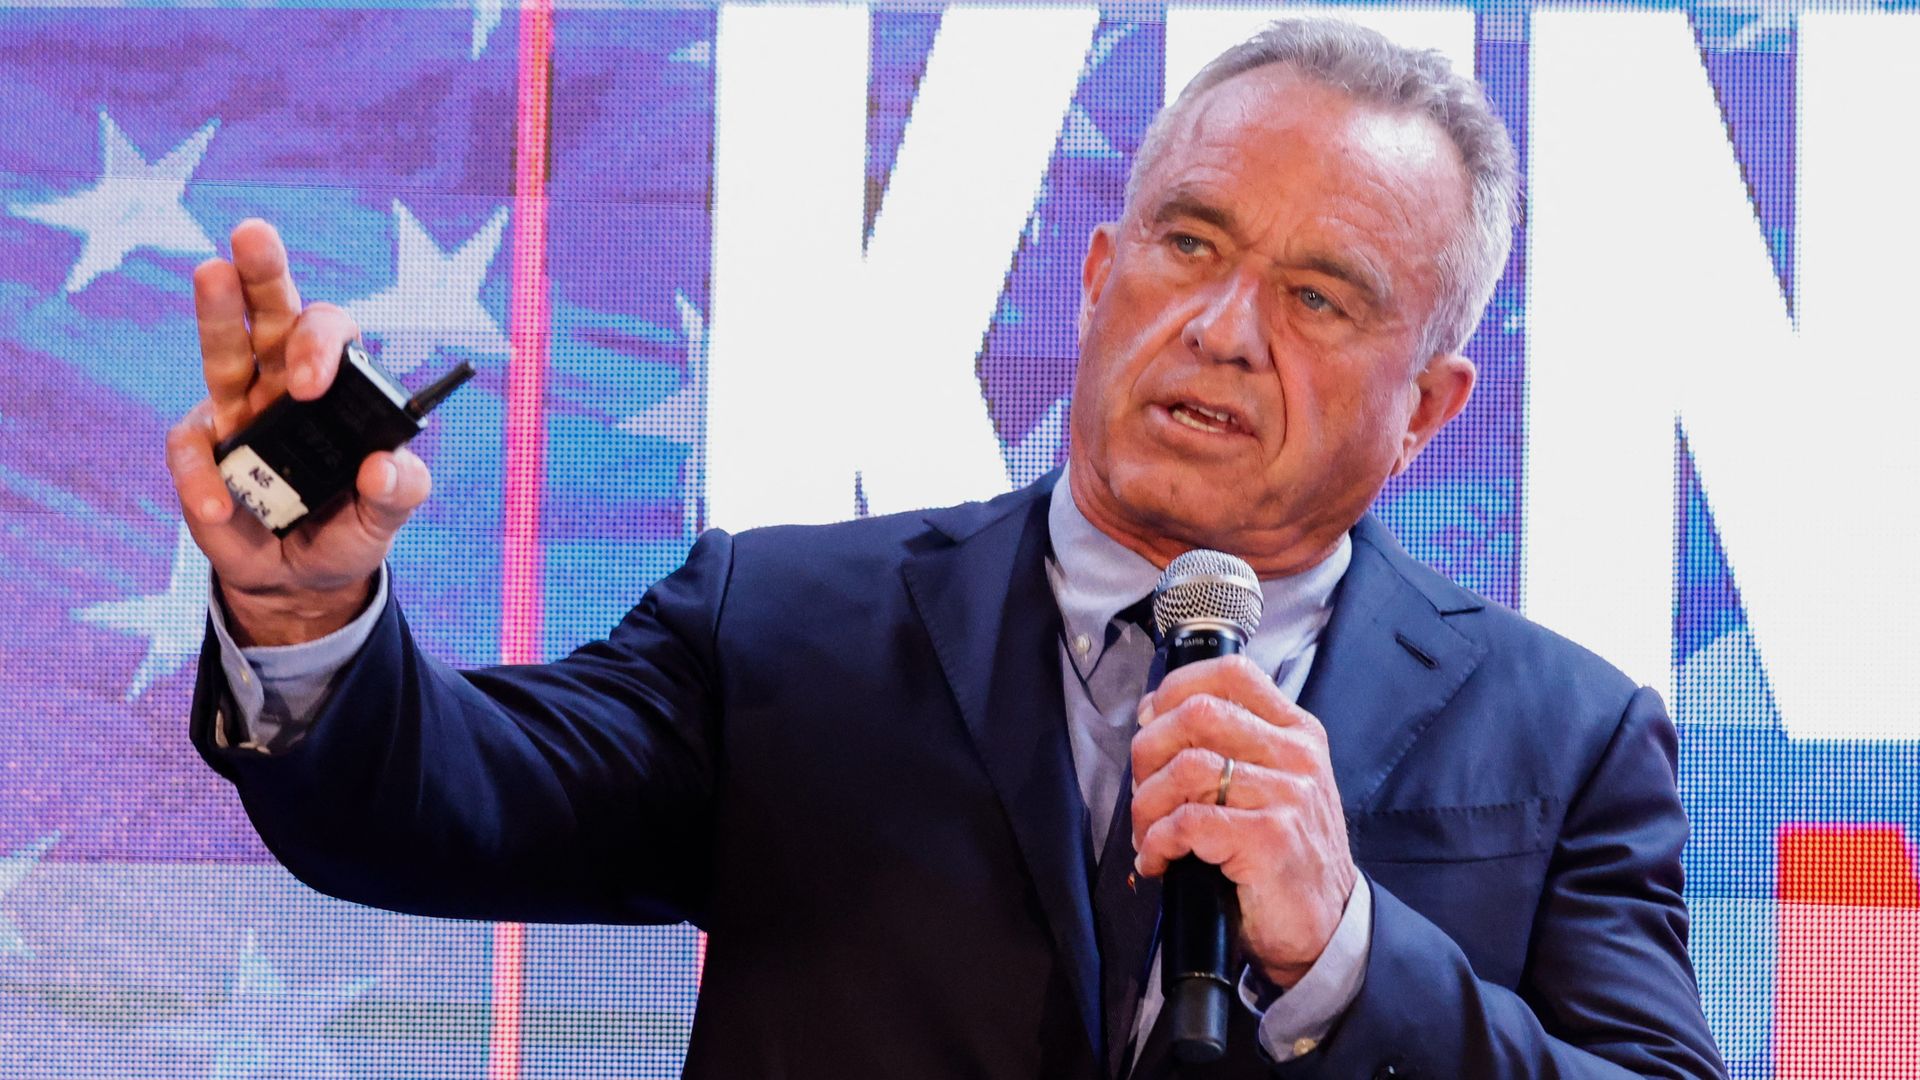 Robert F. Kennedy Jr. speaking in New York City on May 1.